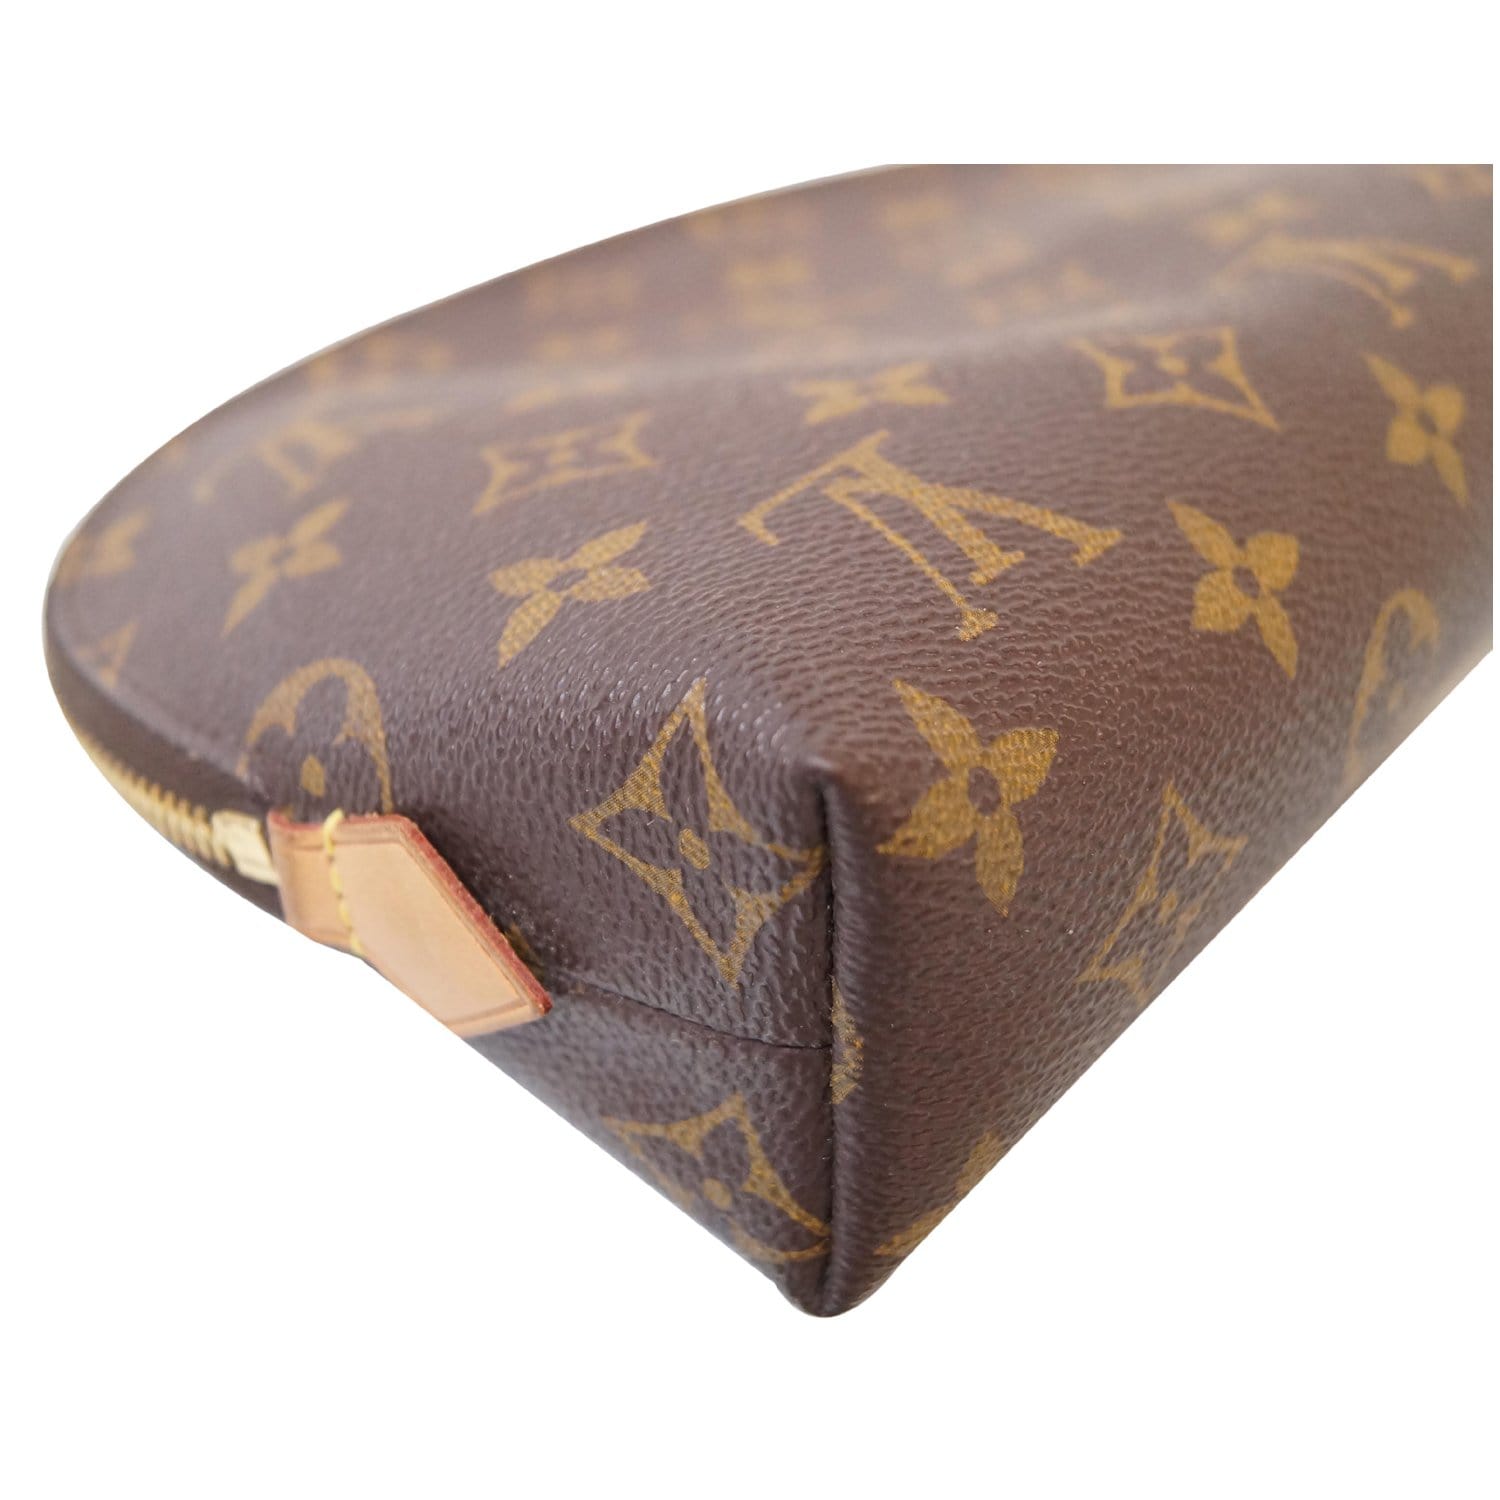 Louis Vuitton Cosmetic Pouch PM in Brown Monogram Coated Canvas, Women's